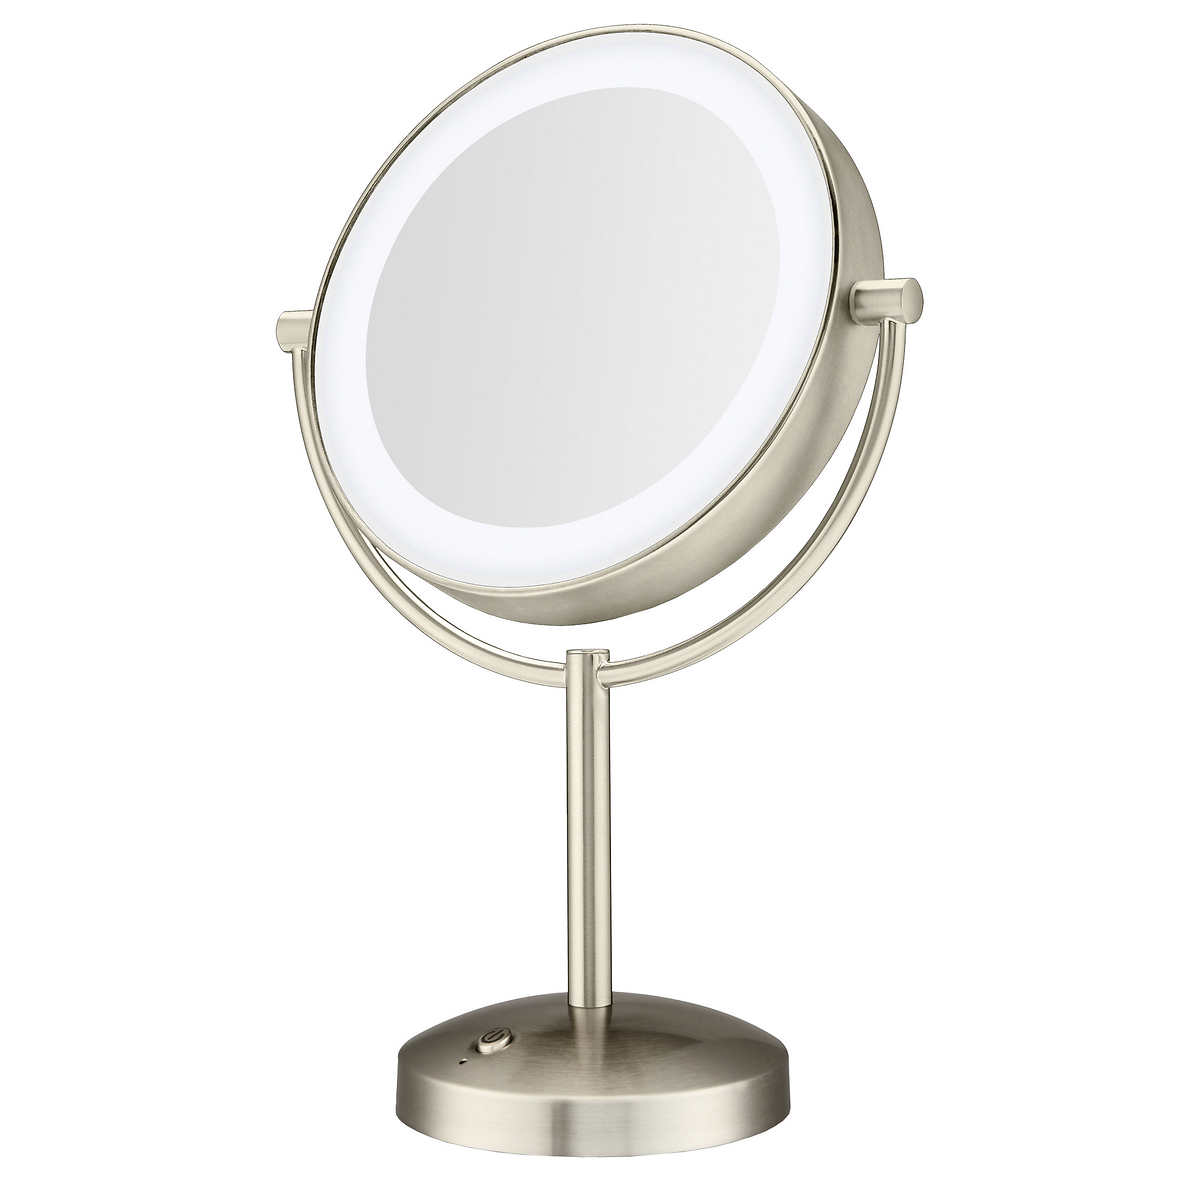 How Much Does a Custom-Cut Mirror Cost?